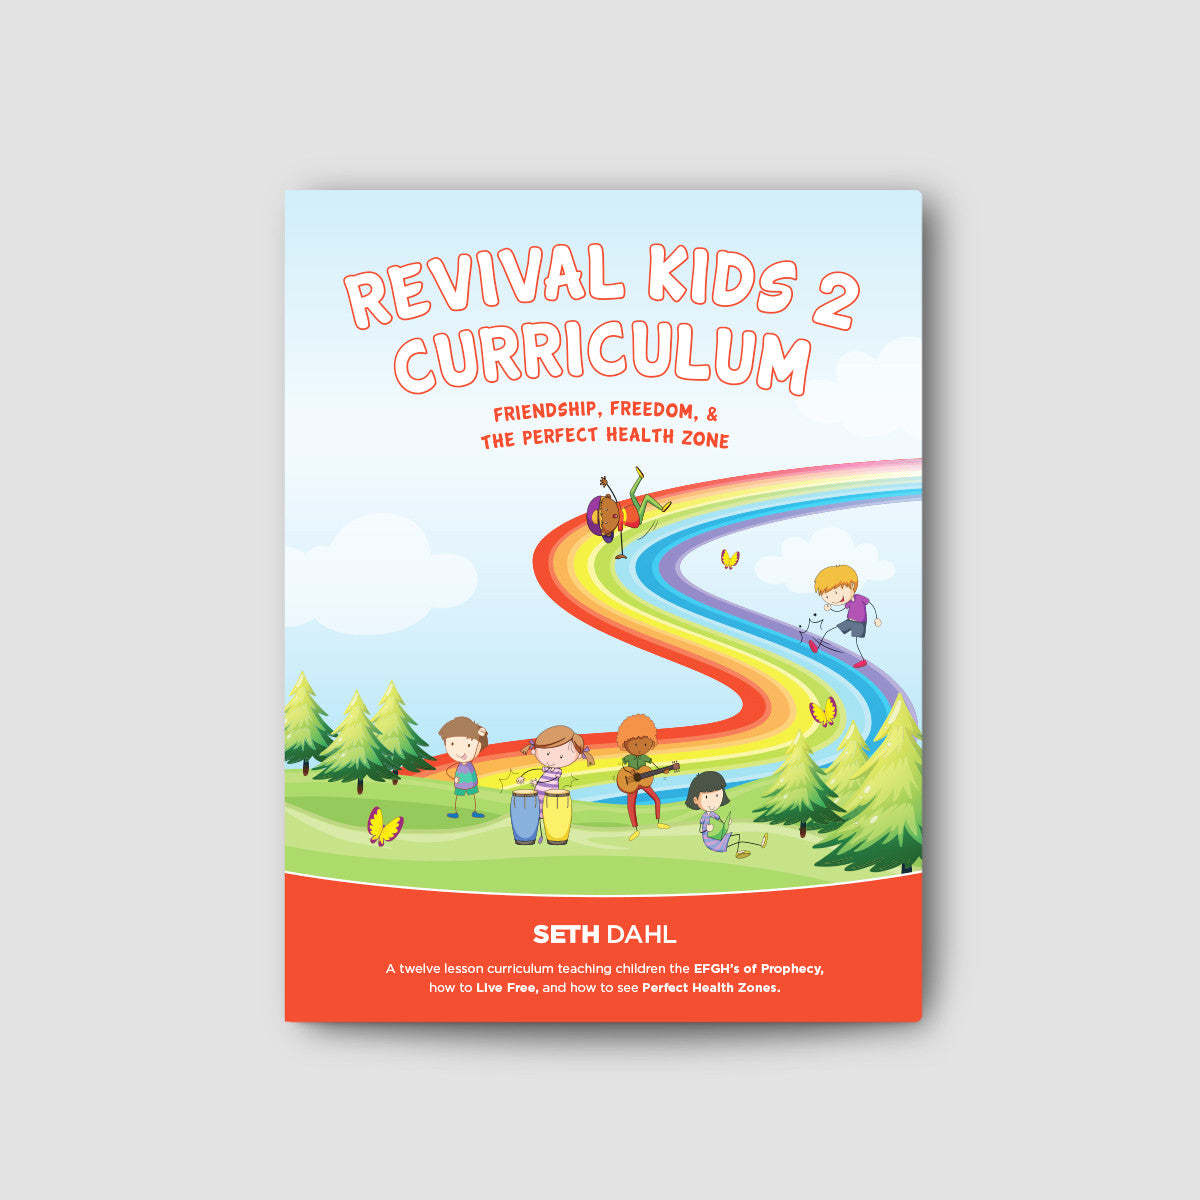 Revival Kids 2 Curriculum: Friendship Freedom & the Perfect Health Zone